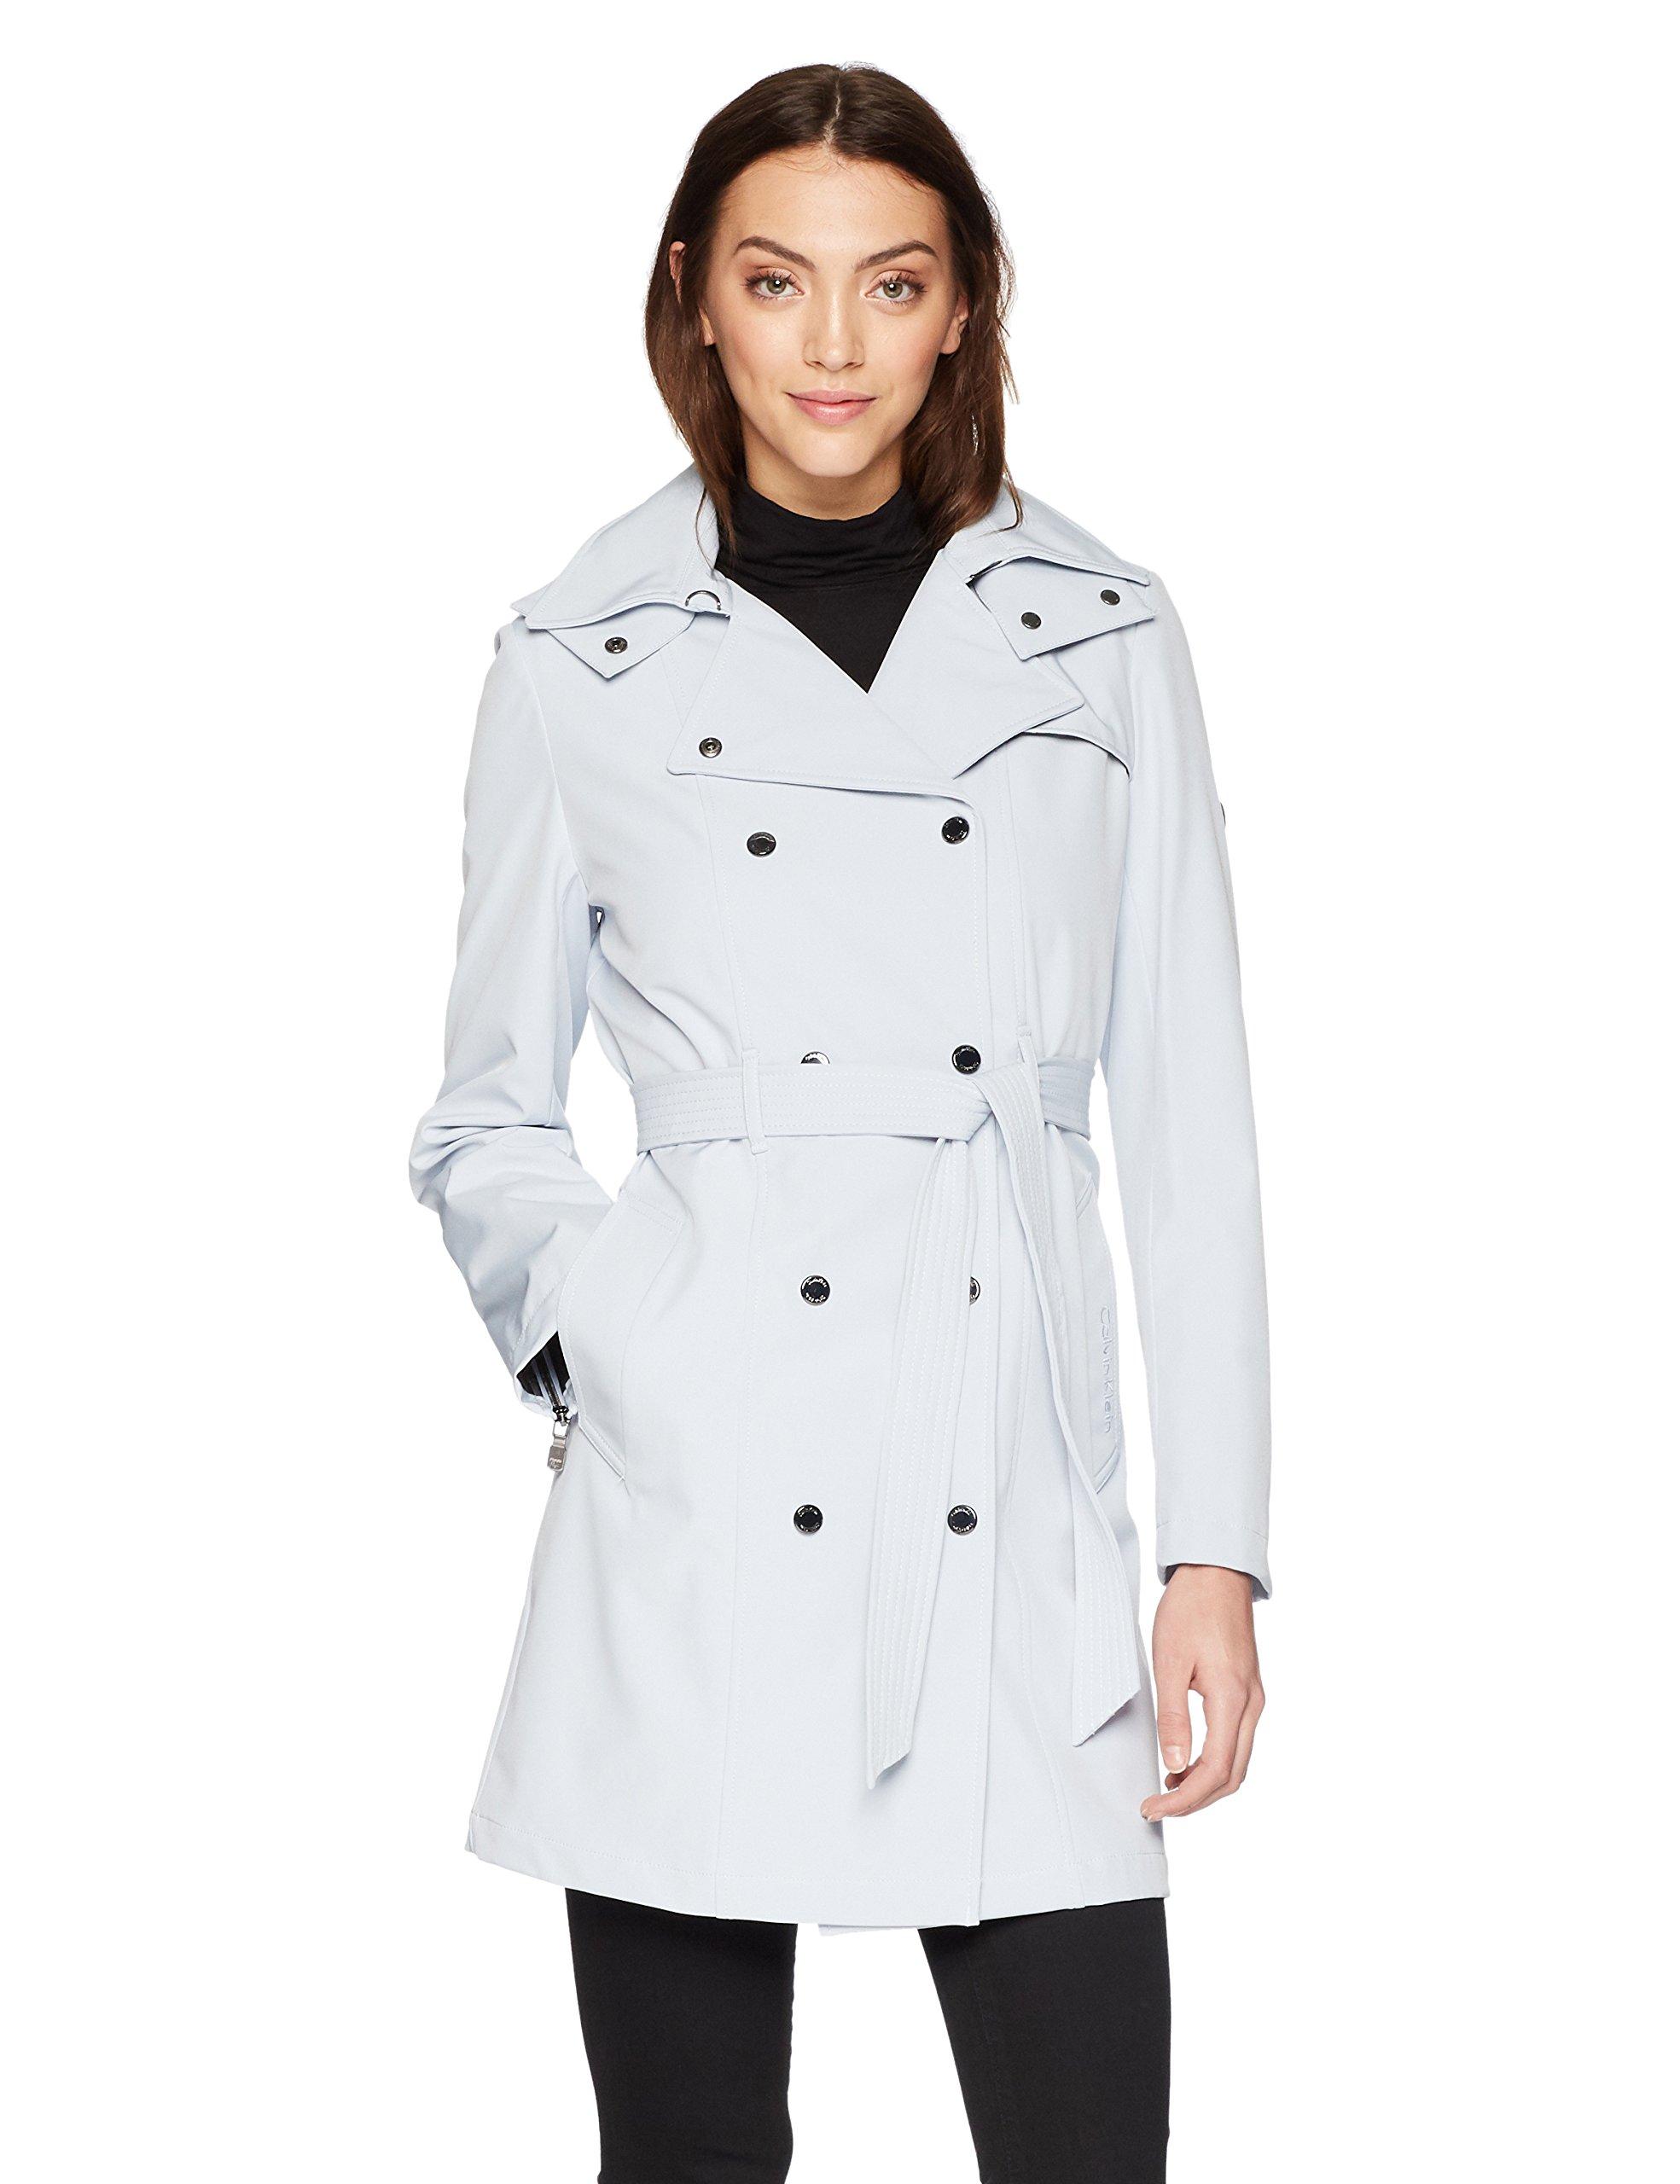 Calvin Klein Double Breasted Belted Rain Jacket With Removable Hood in  Powder Blue (Blue) - Lyst